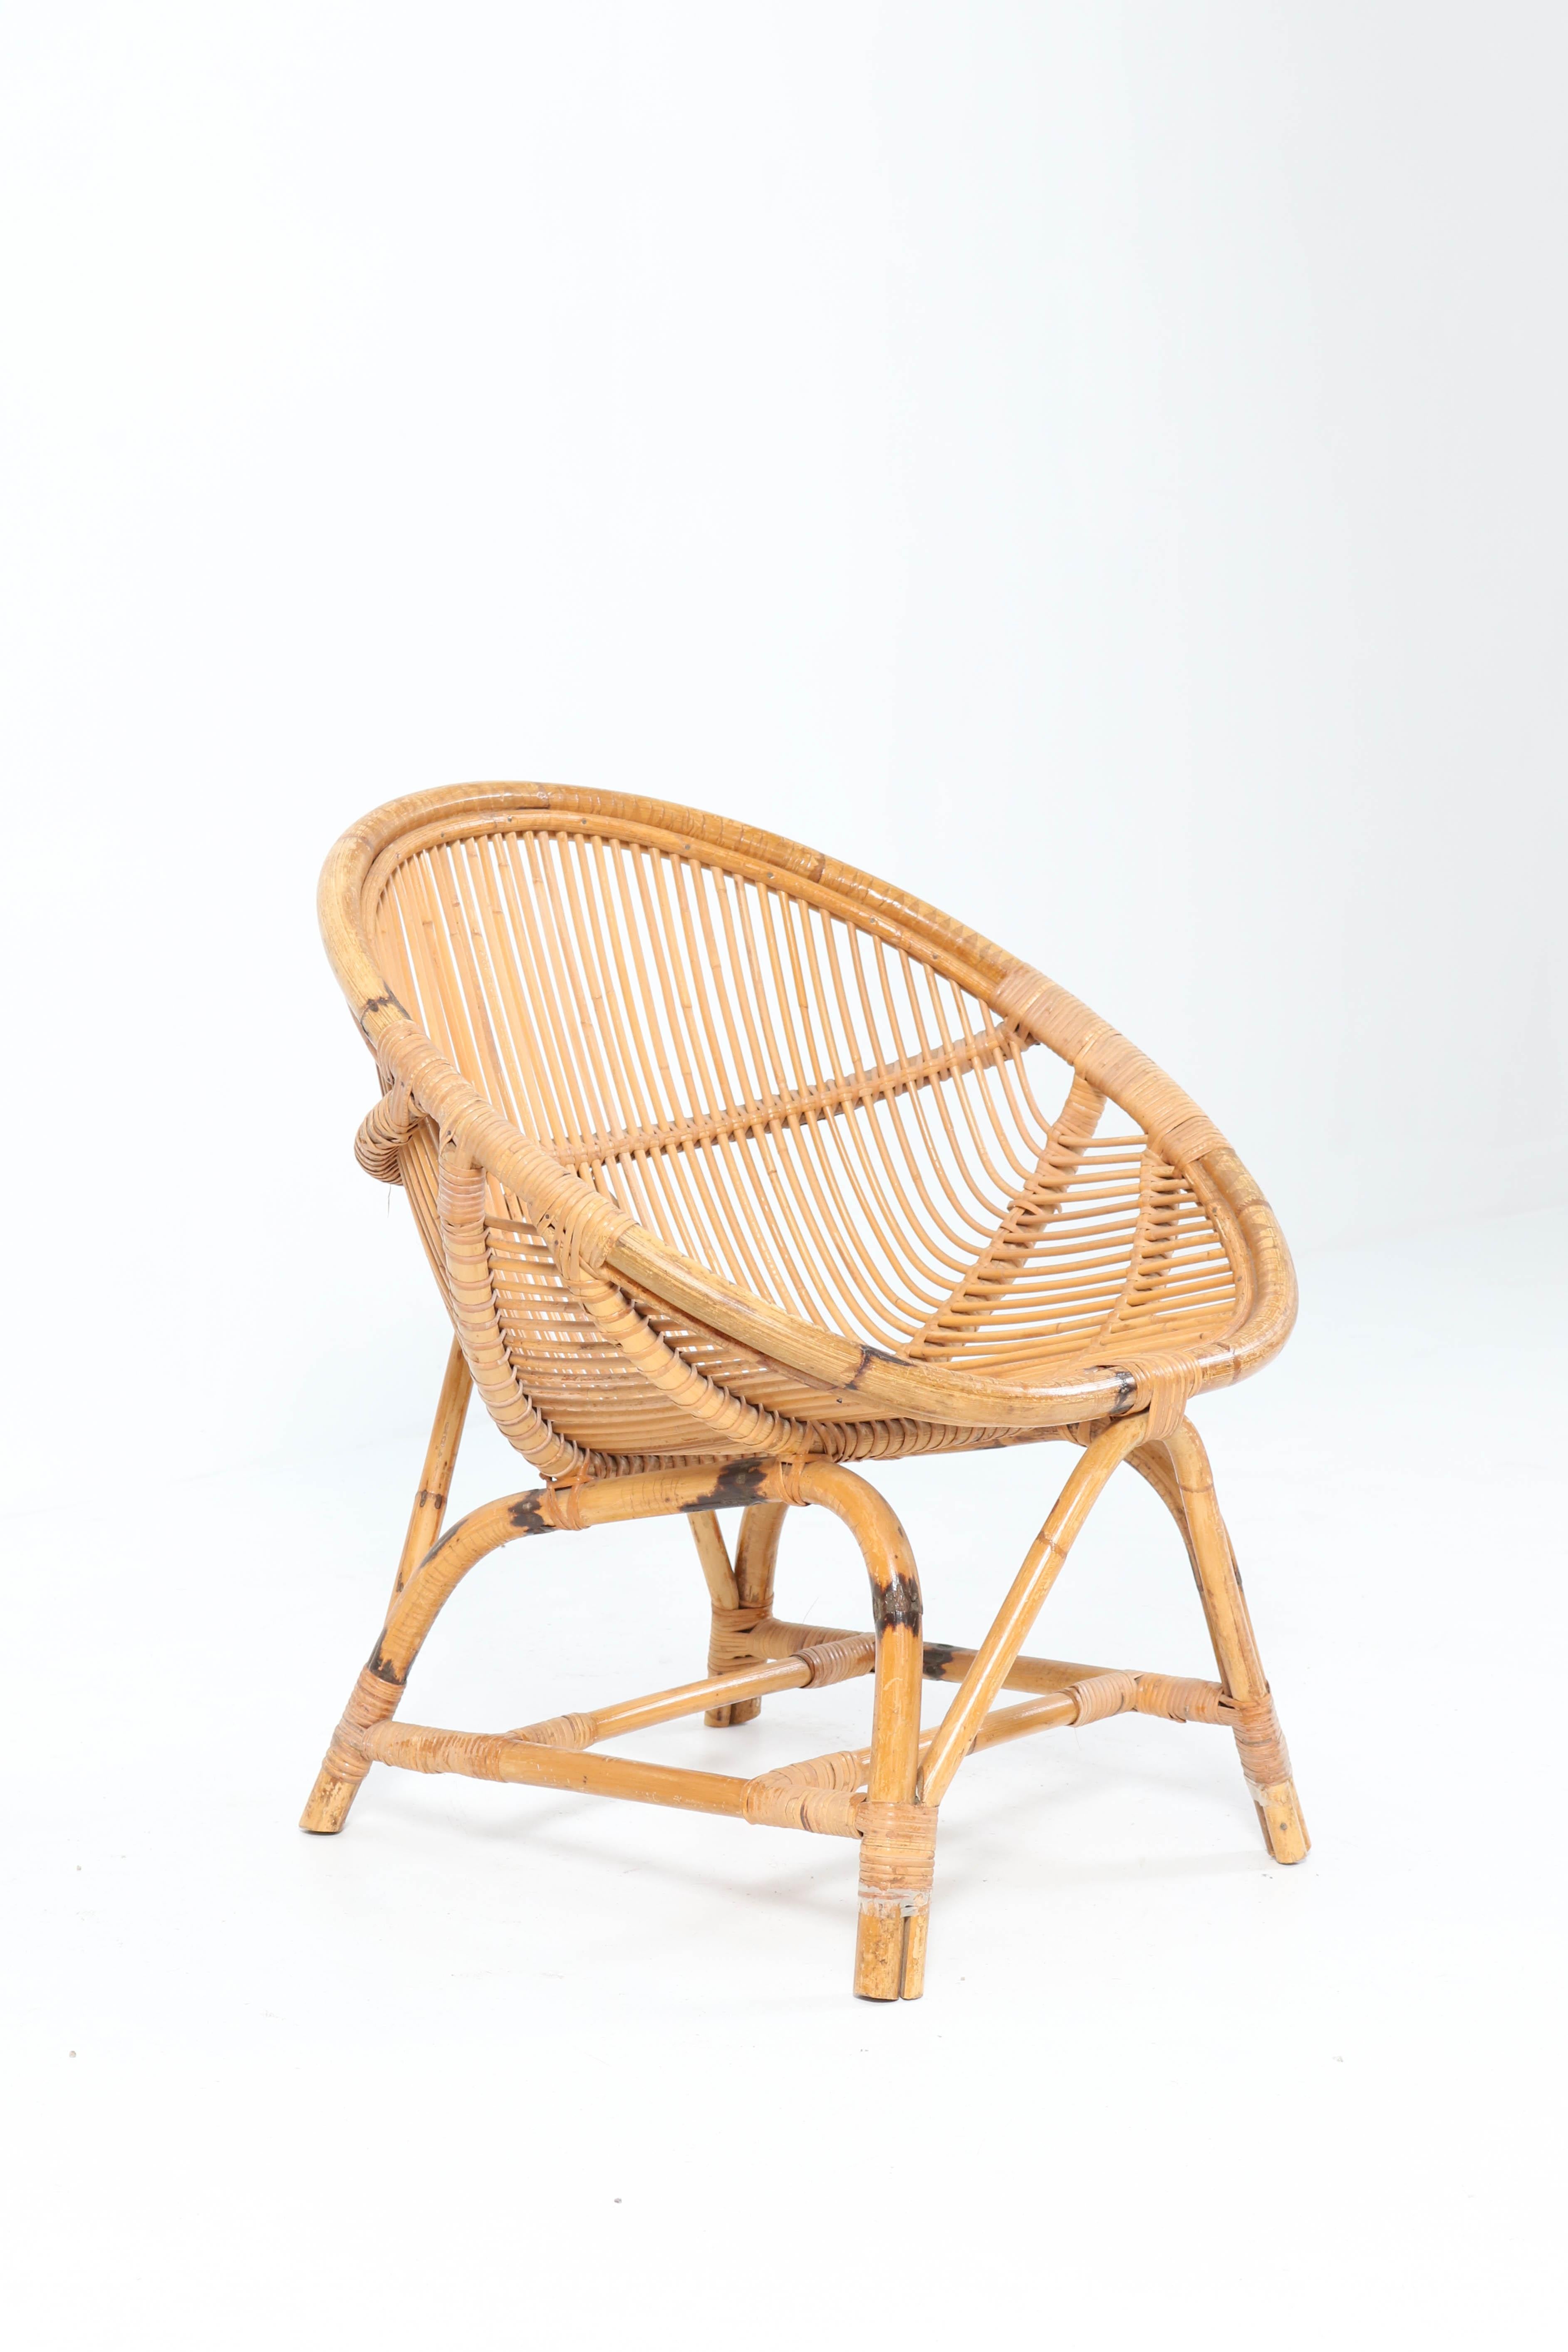 Pair of Mid-Century Modern Bamboo Rattan Lounge Chairs, 1950s 3